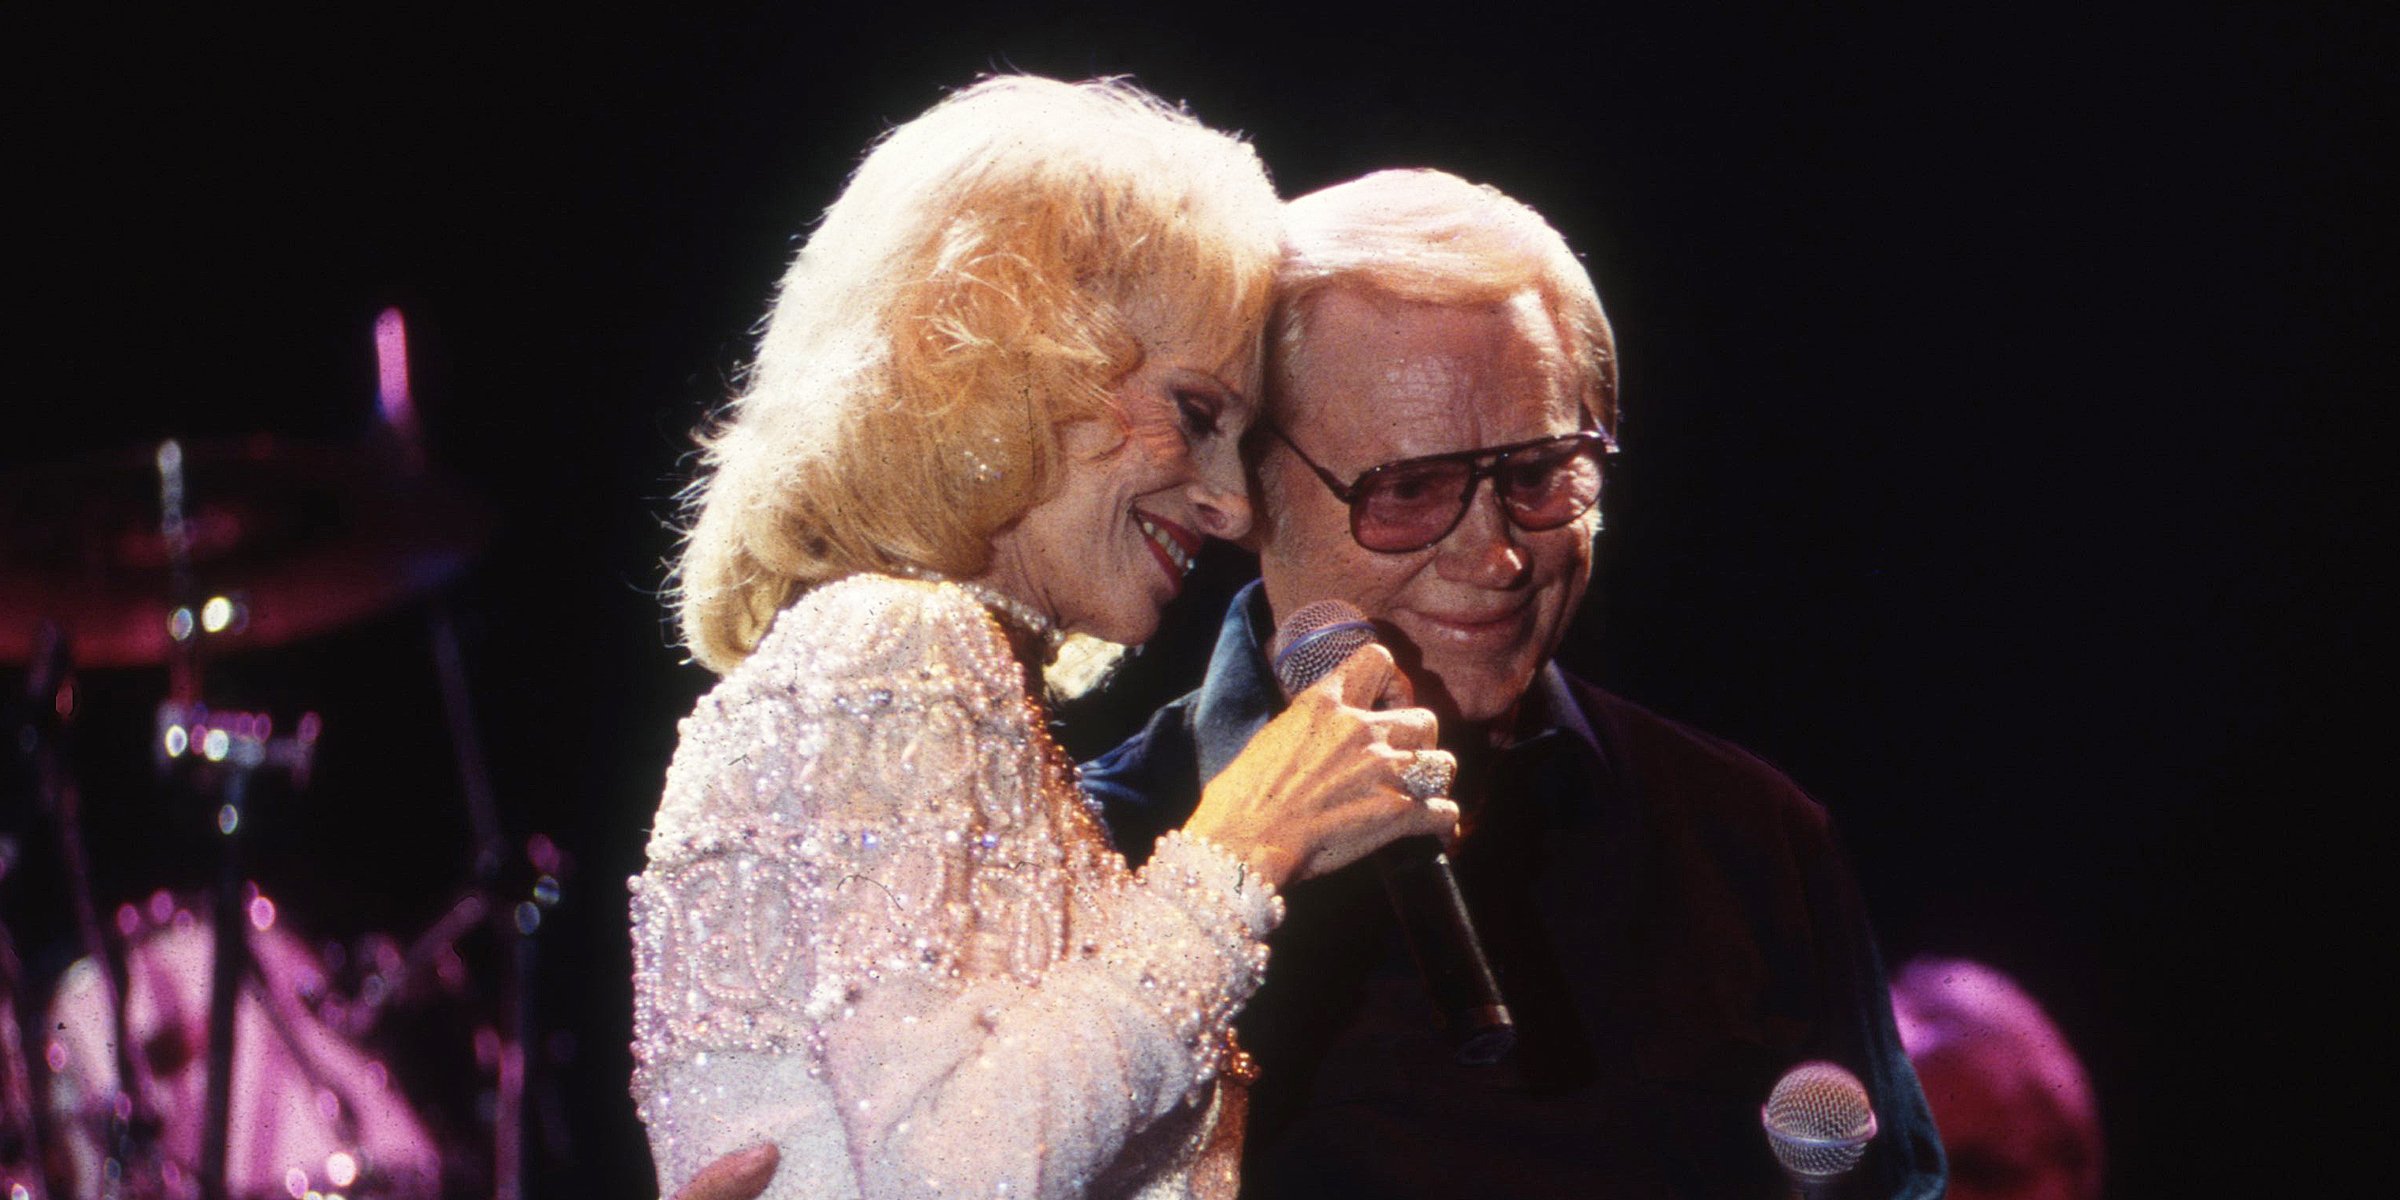 Tammy Wynette and George Jones | Source: Getty Images